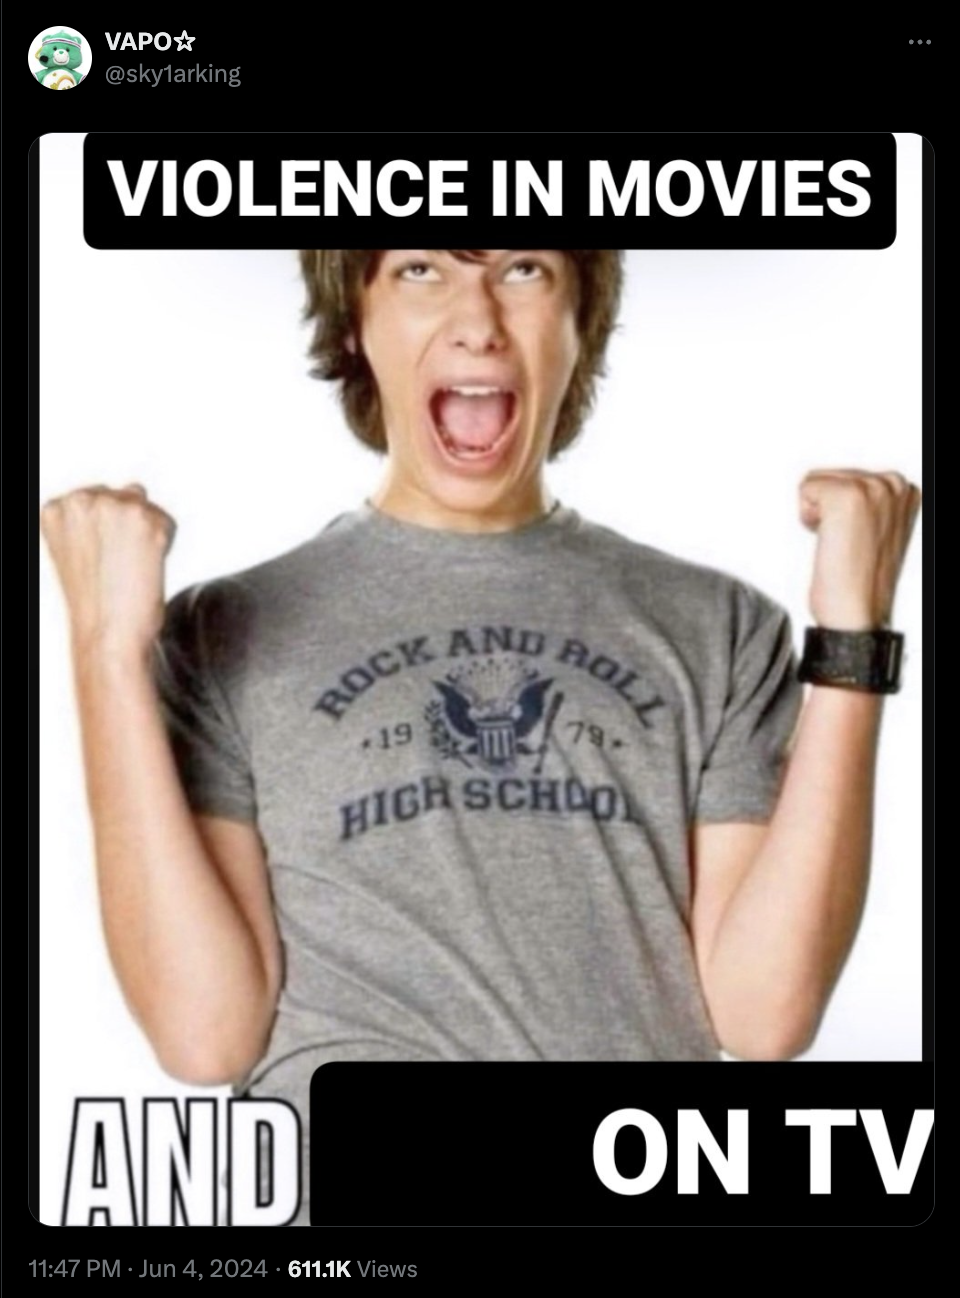 photo caption - Vapo Violence In Movies Rock And Roll 19 High Schoo And Views On Tv